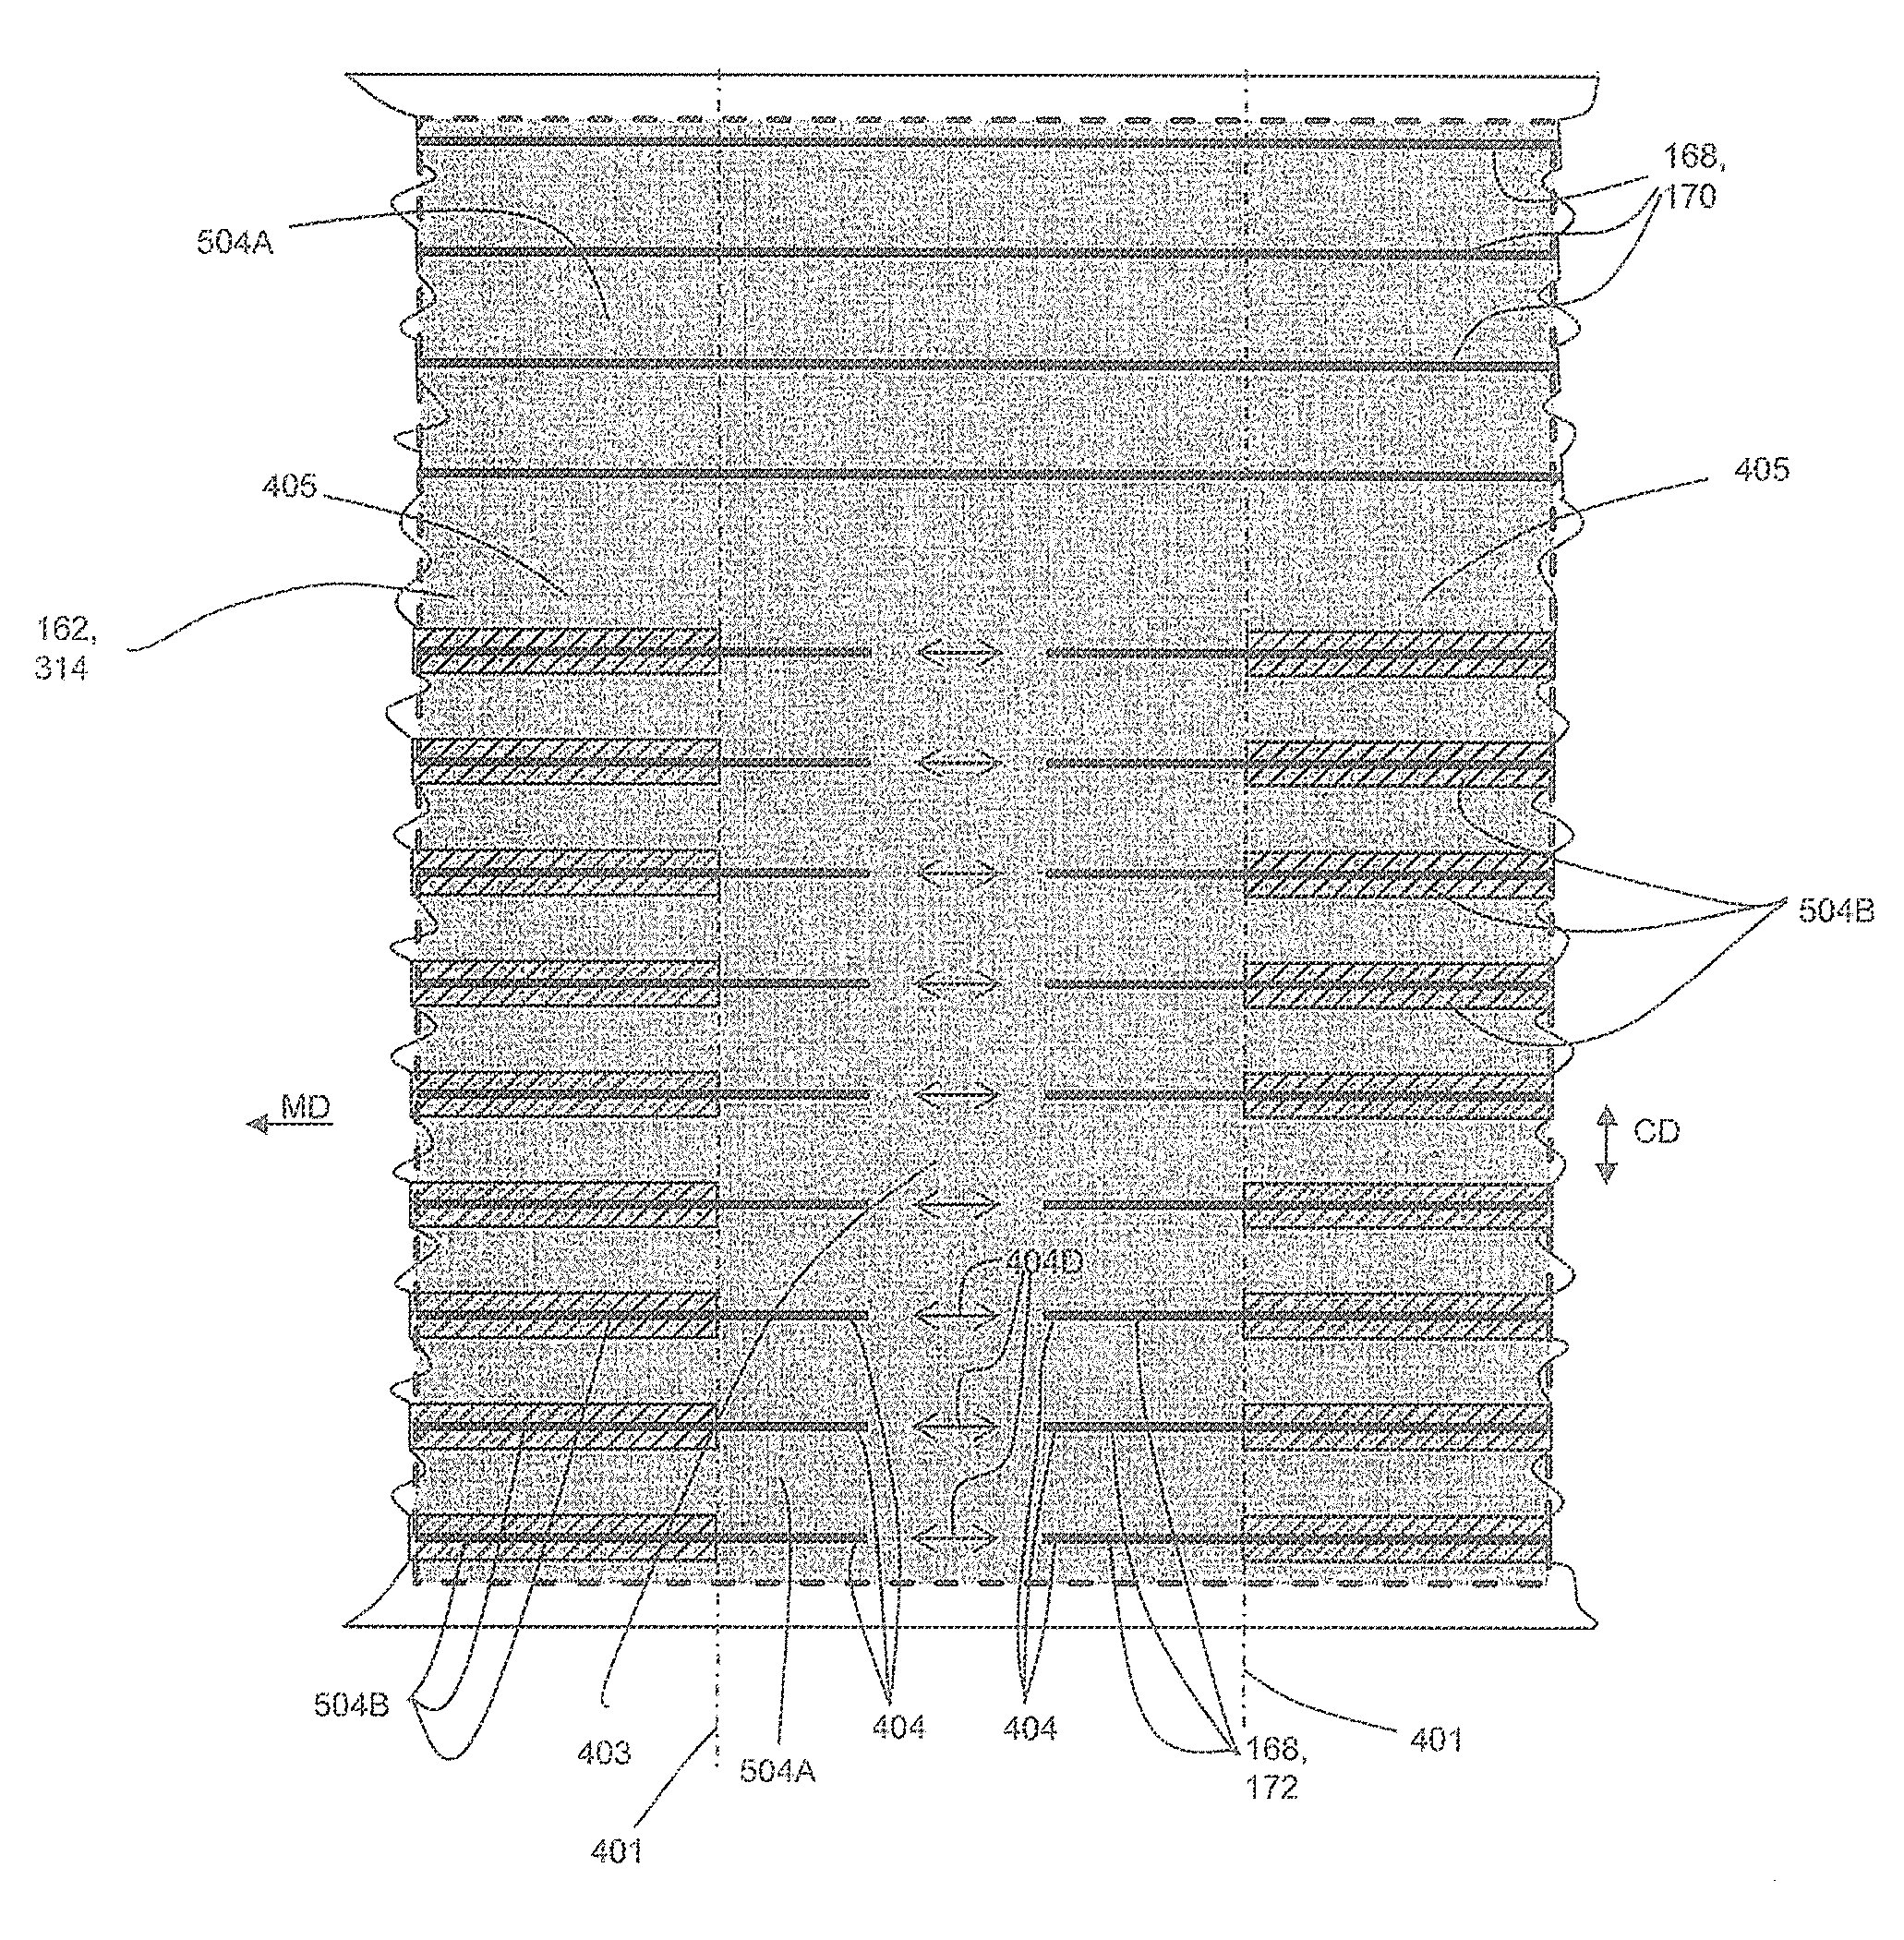 Apparatuses and methods for making absorbent articles